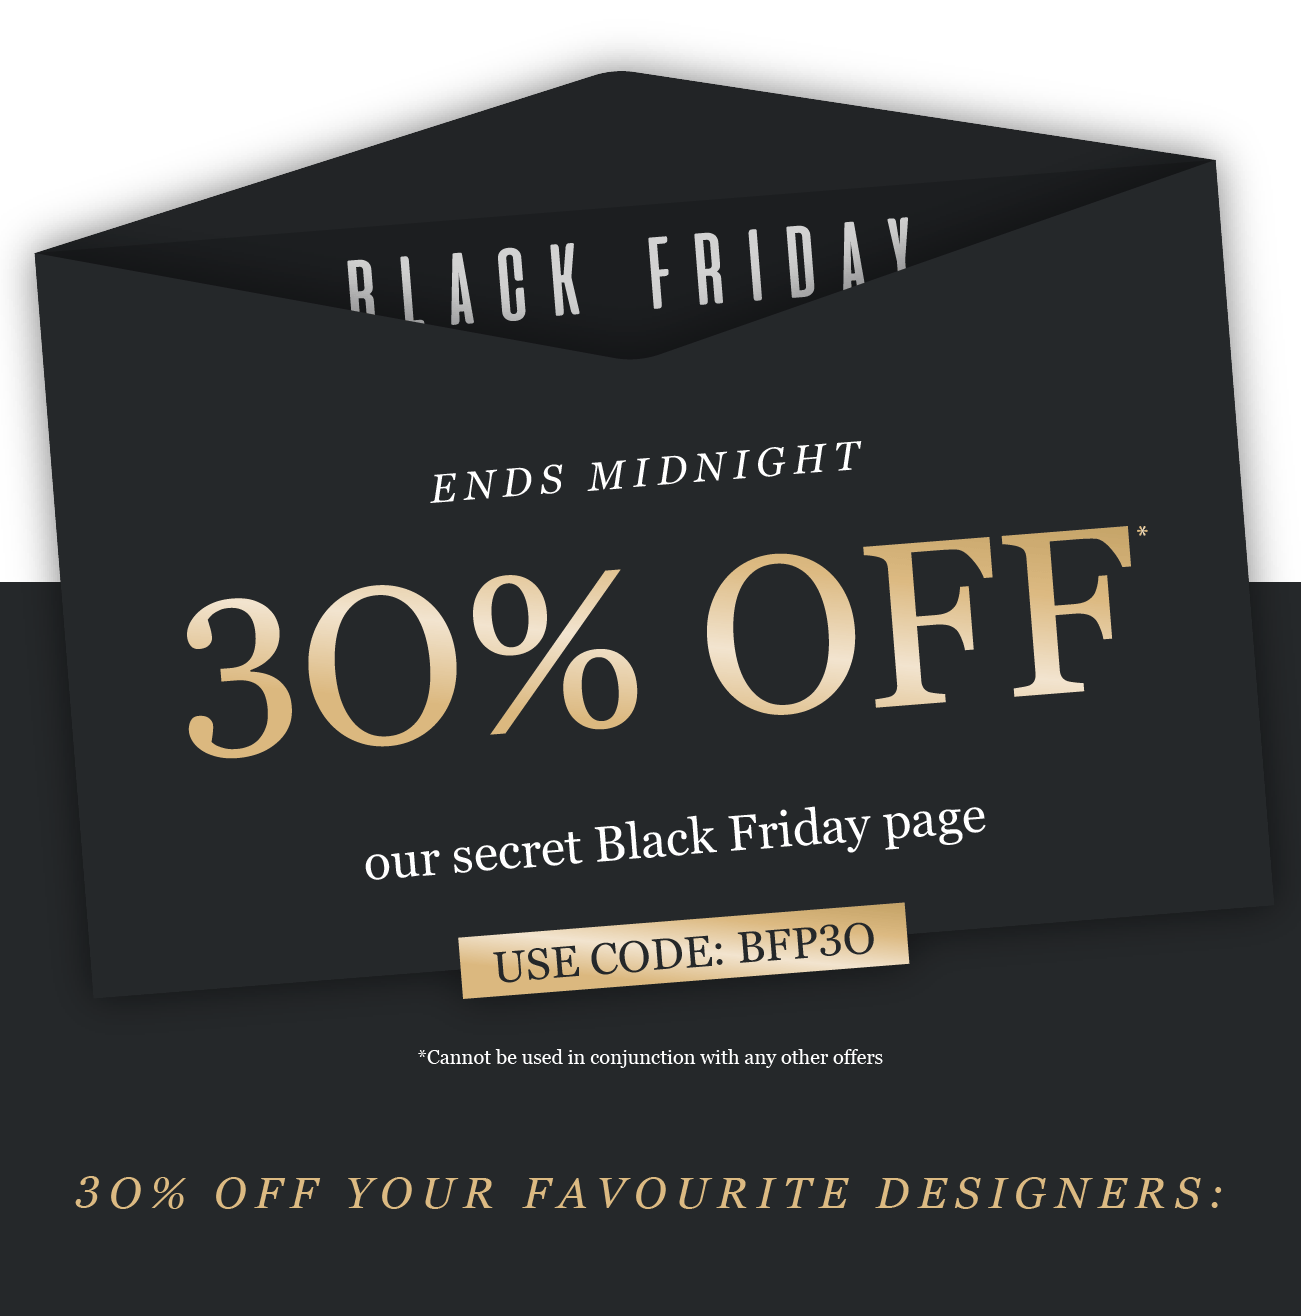 black friday
ENDS MIDNIGHT
30% OFF*
our secret Black Friday page

*Cannot be used in conjunction with any other offers

USE CODE: BFP3O
3O% OFF OUR FAVOURITE DESIGNERS: